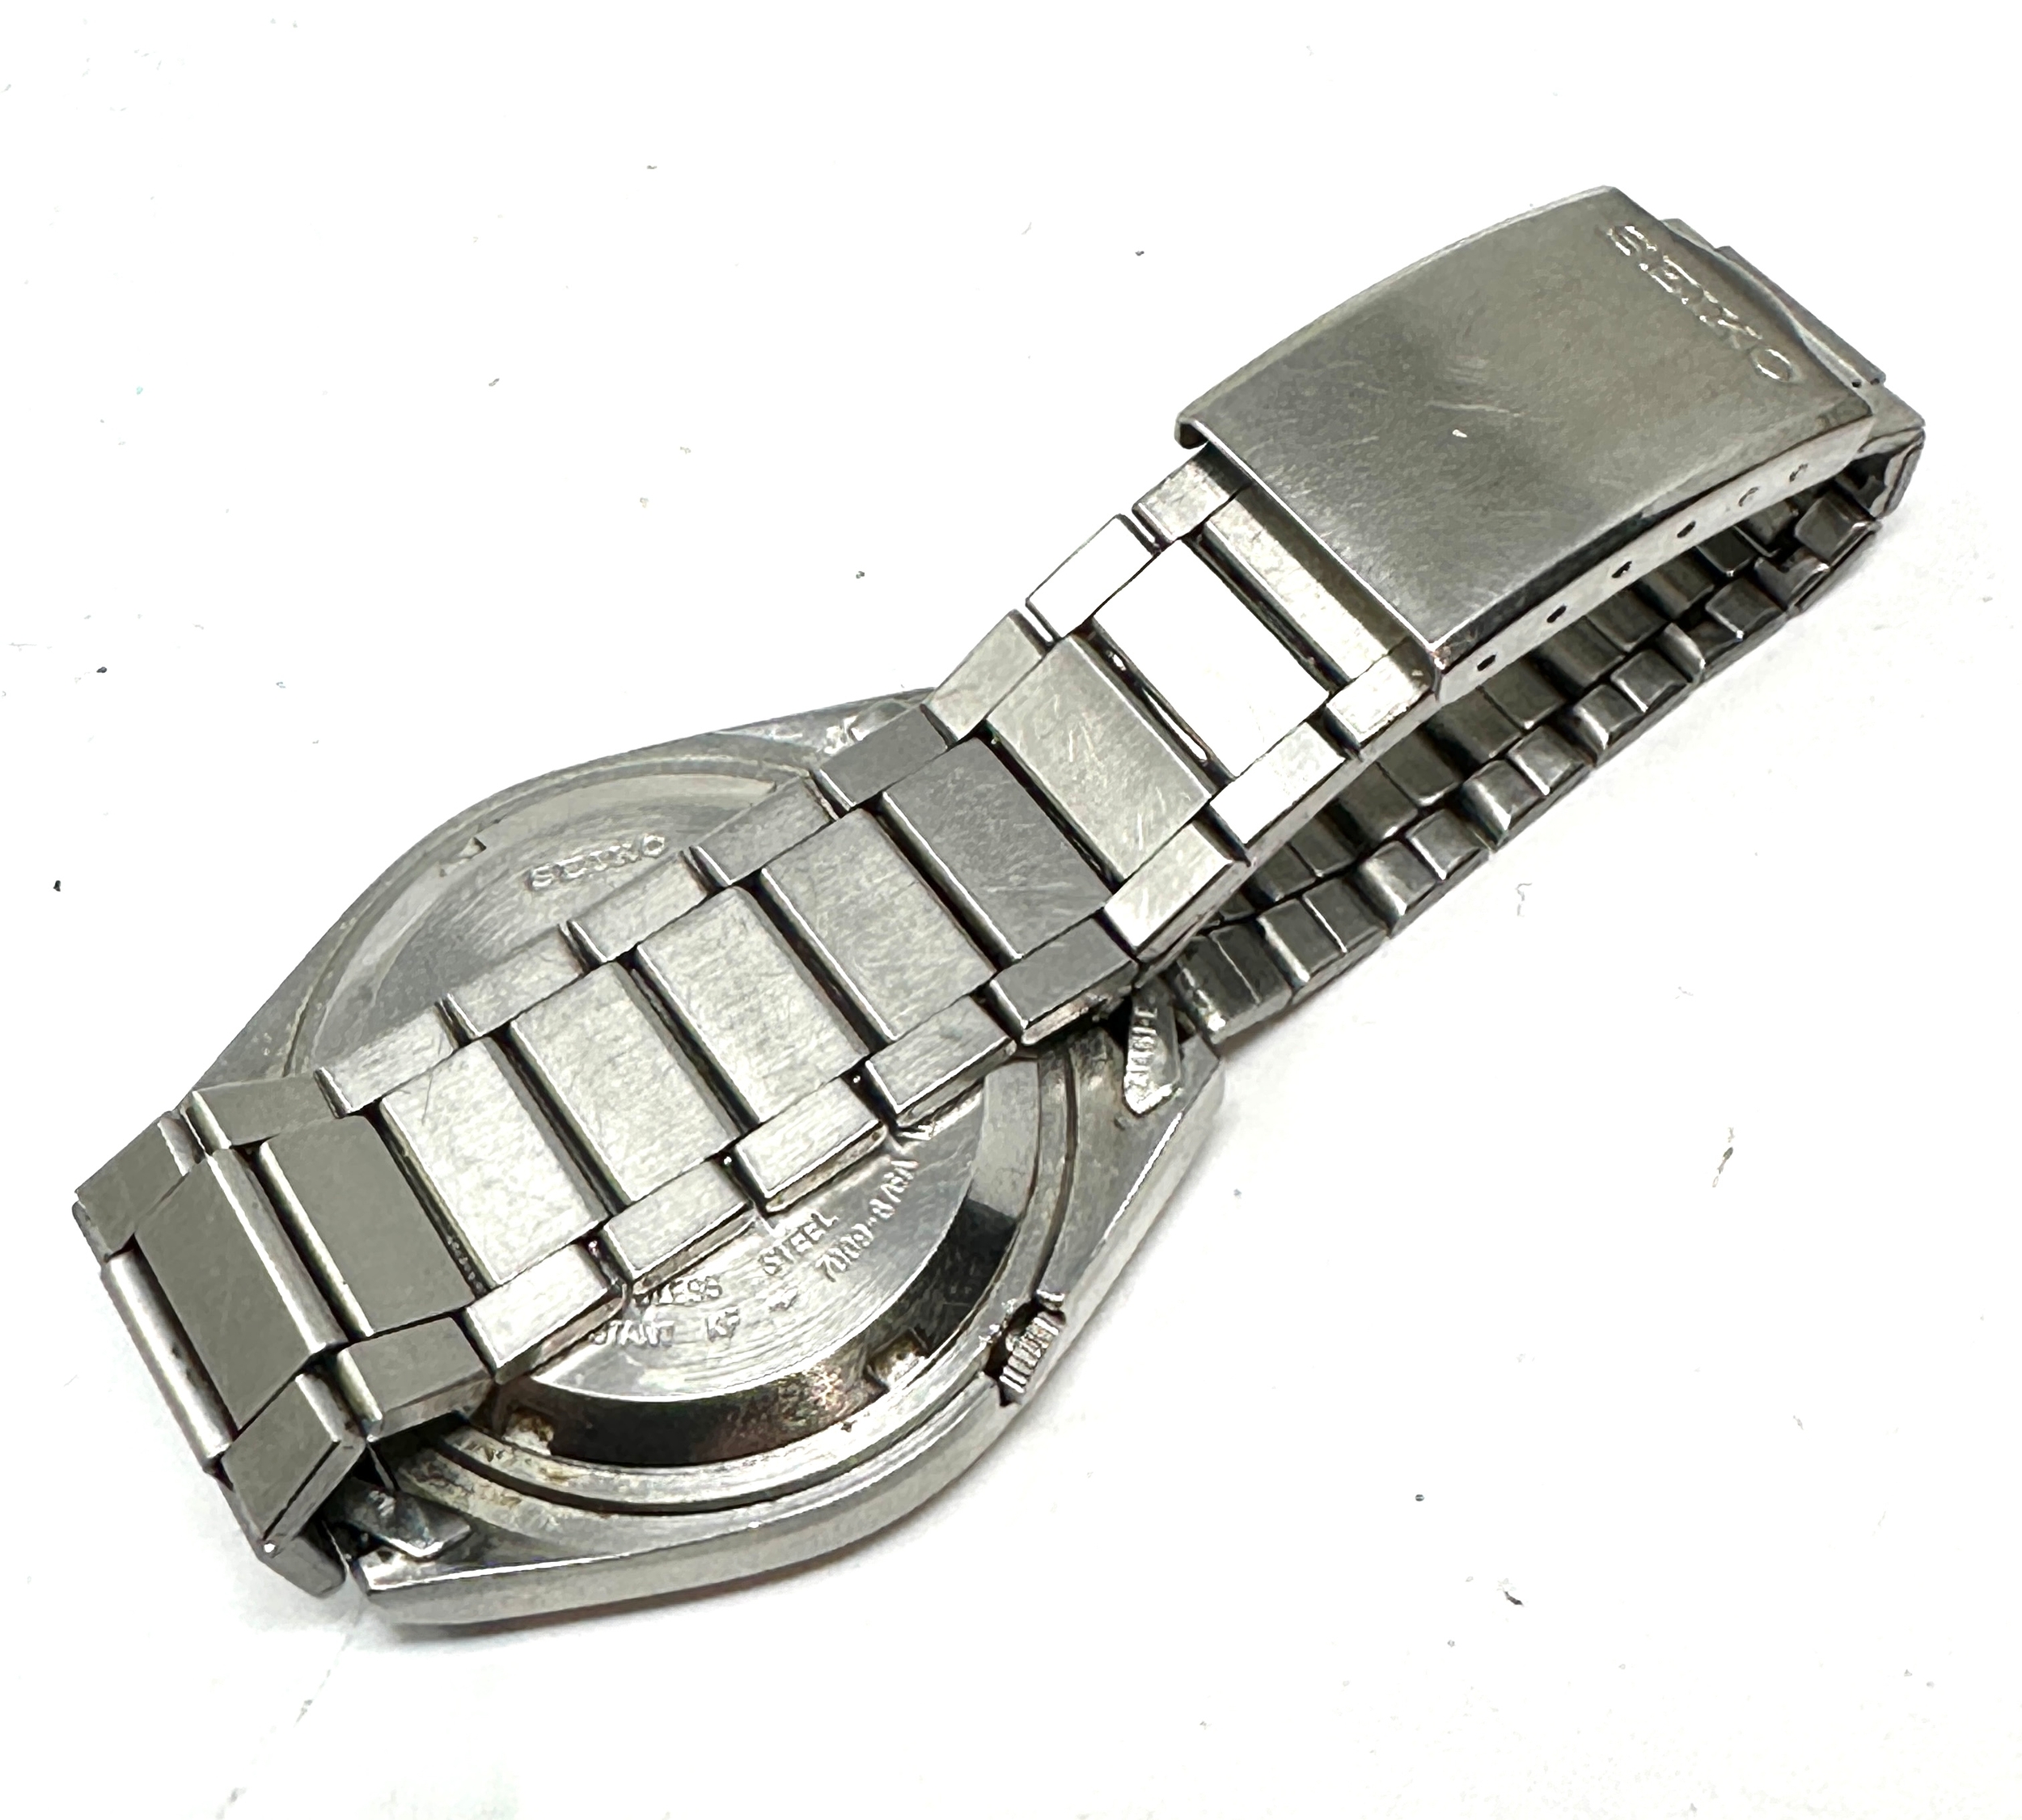 Gents Seiko 5 automatic wristwatch the watch is ticking 7009-876a day date - Image 3 of 4